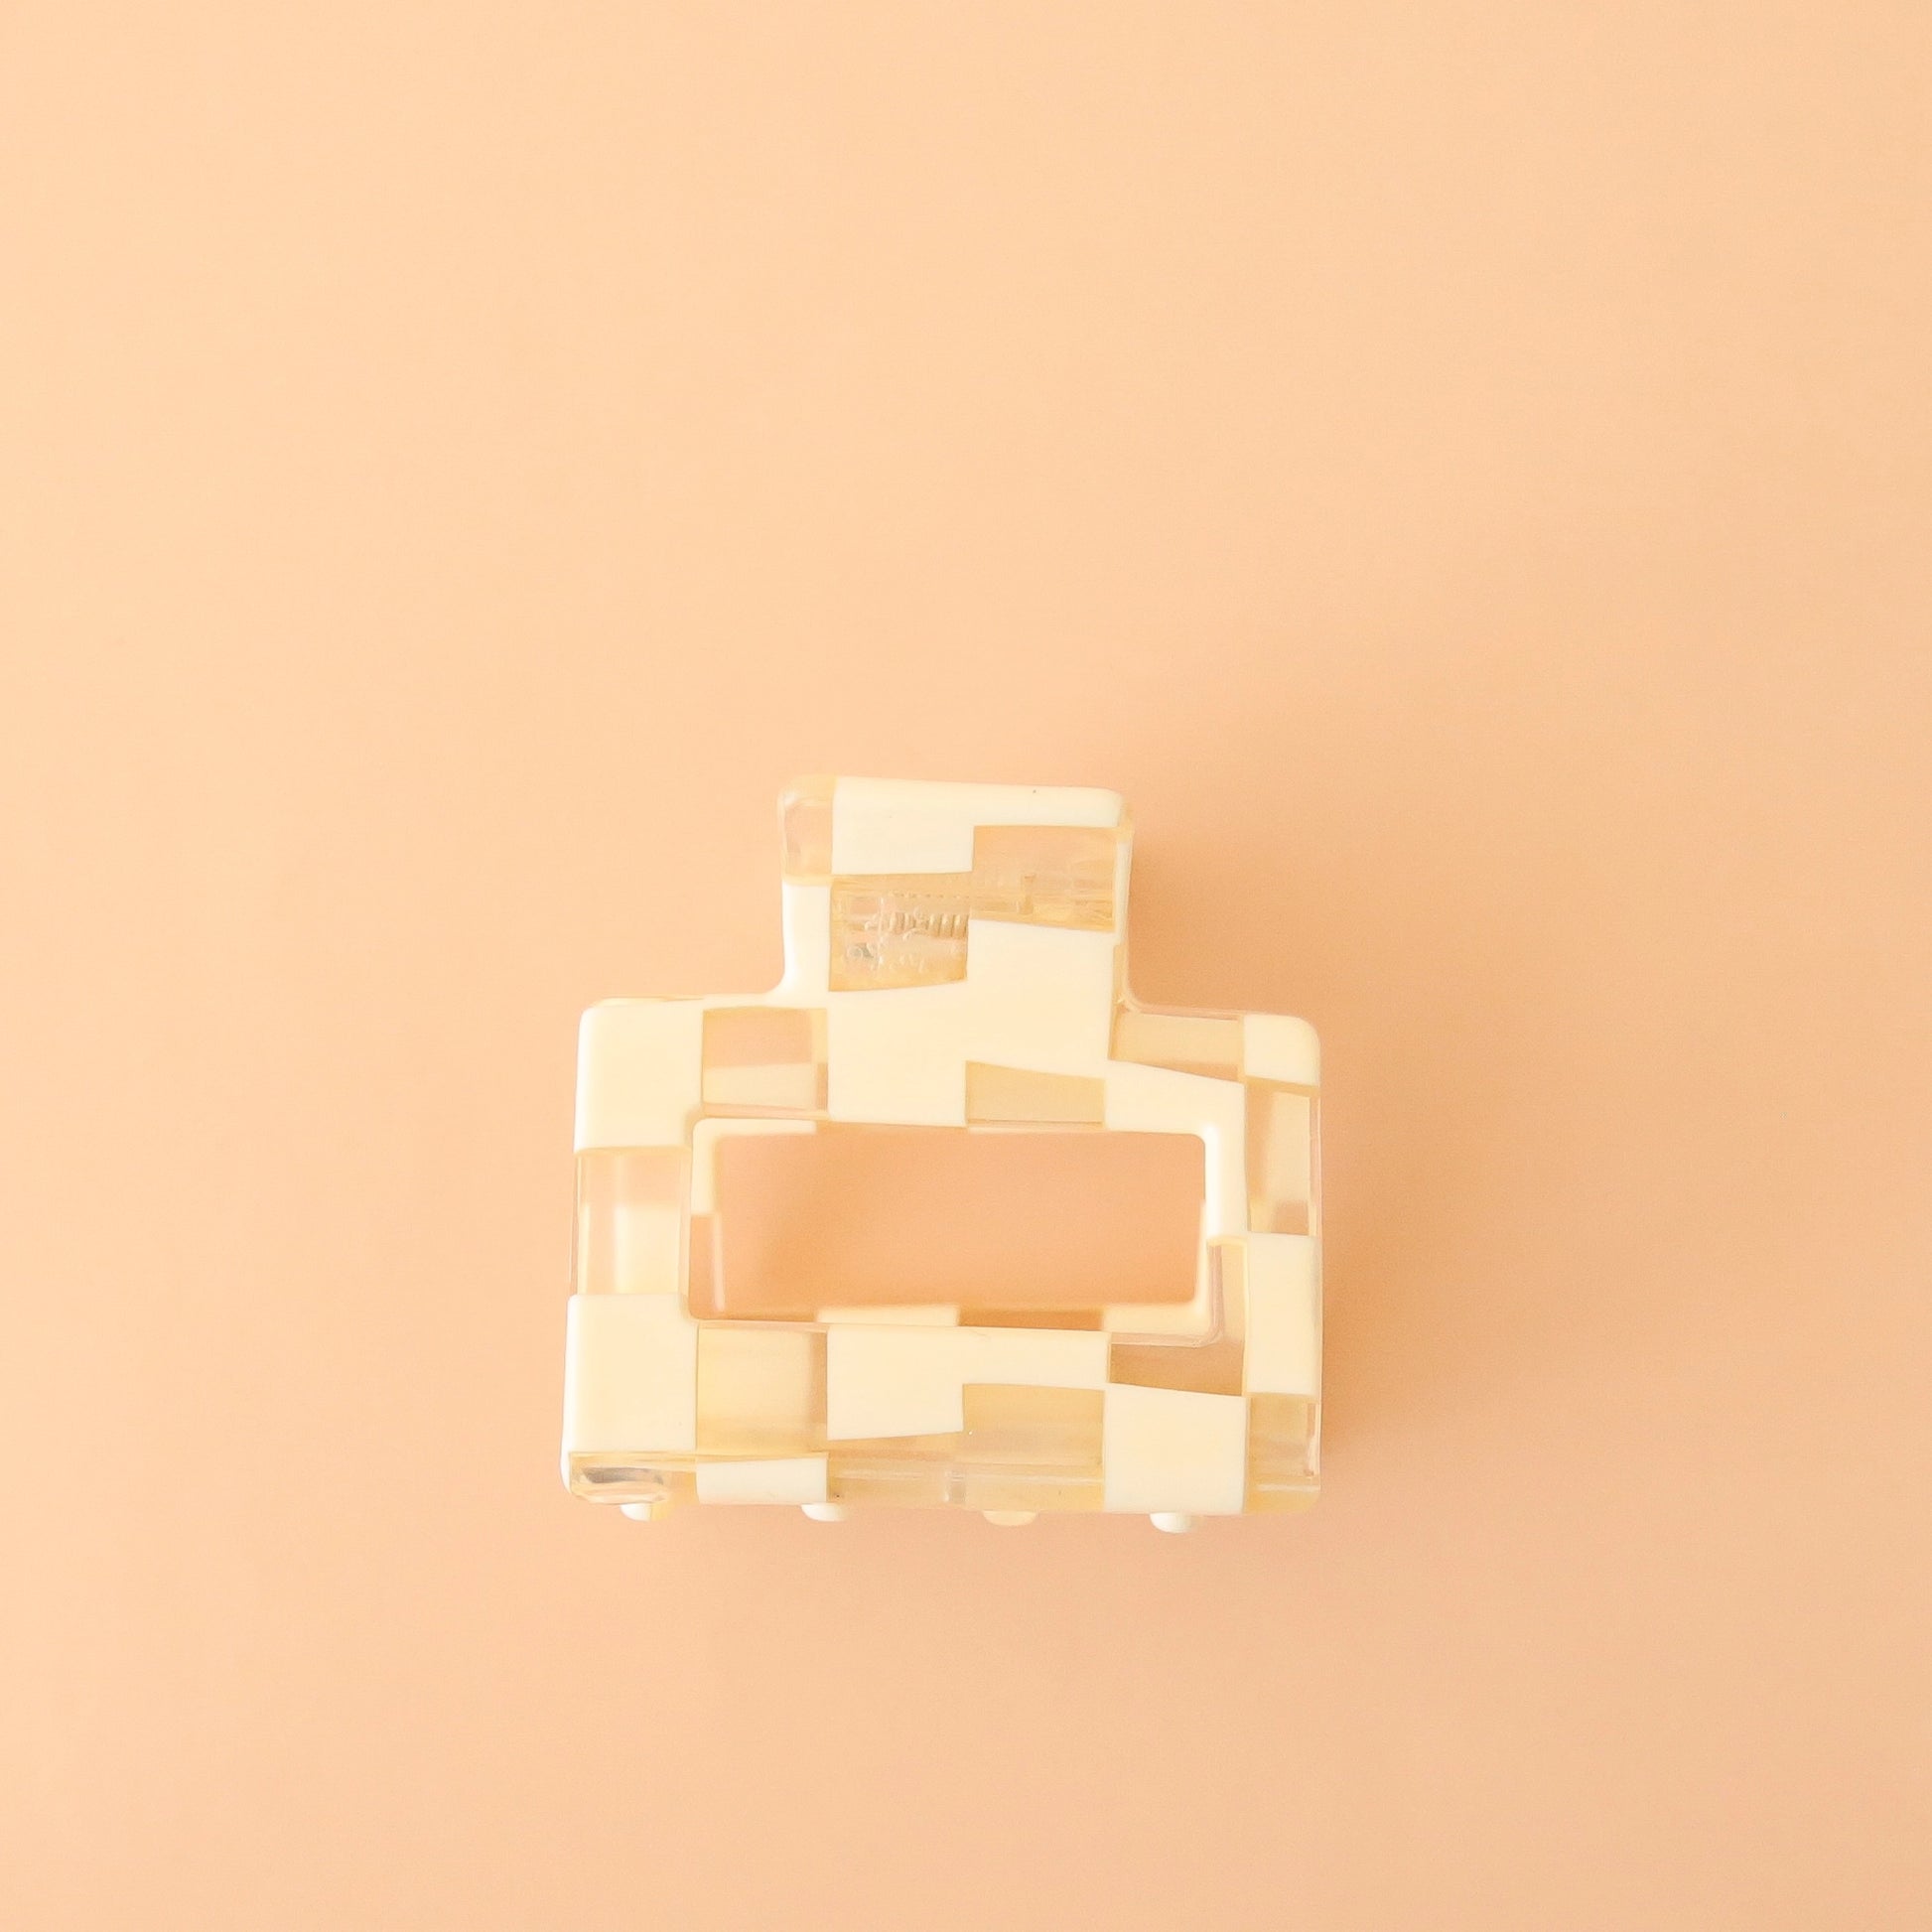 On a peachy background is a square ivory and clear claw clip. 